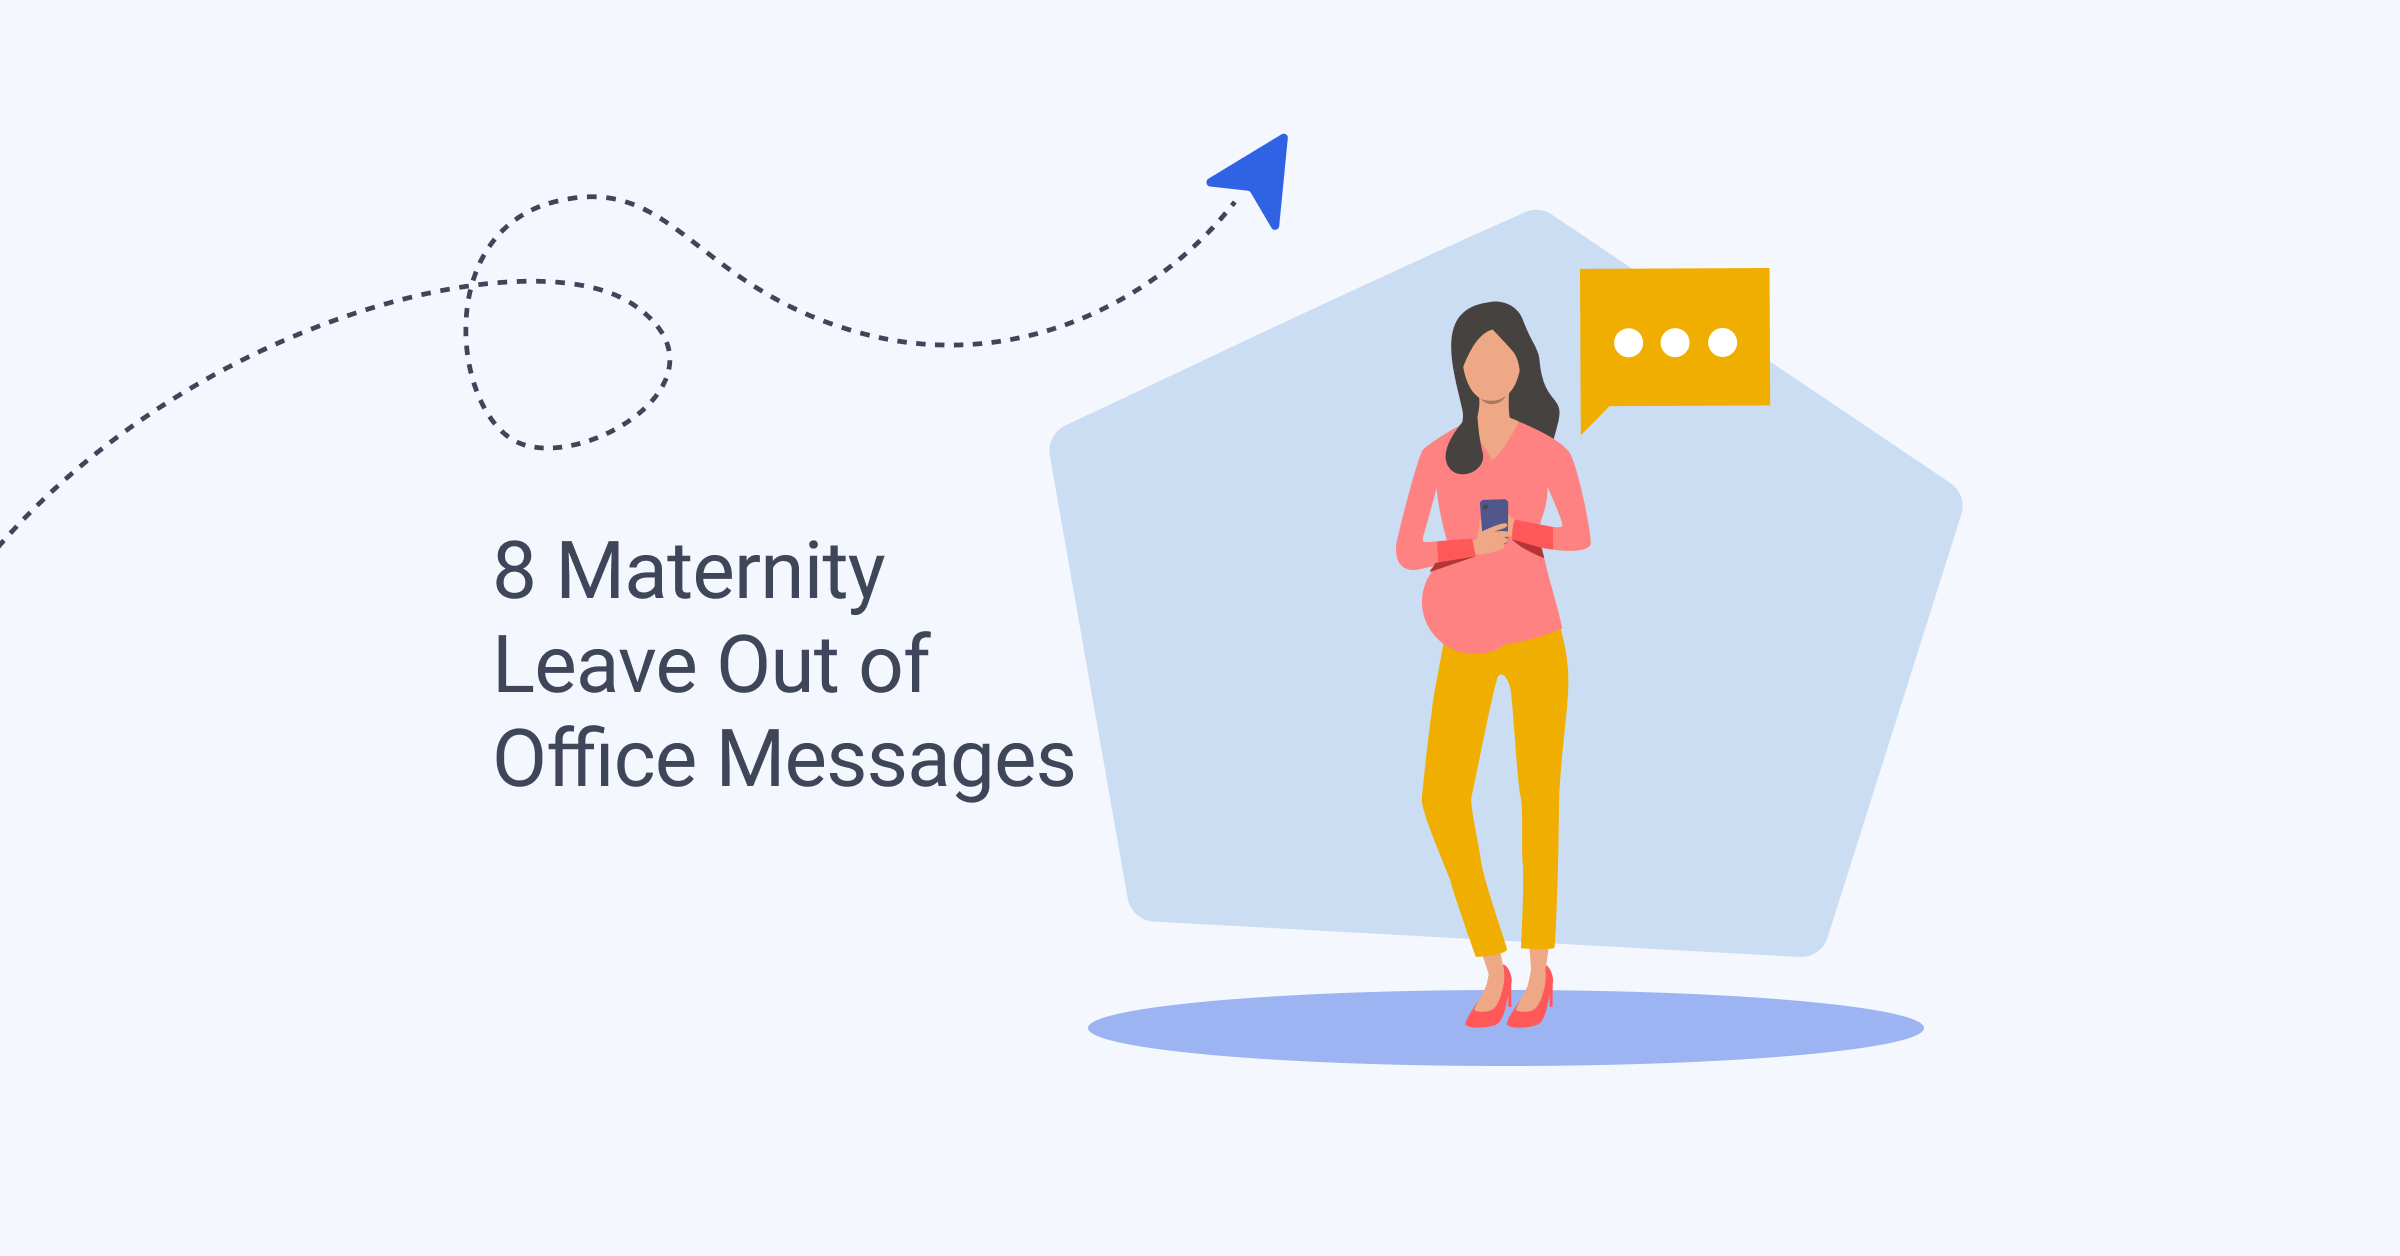 Writing a Thoughtful Maternity Leave Message